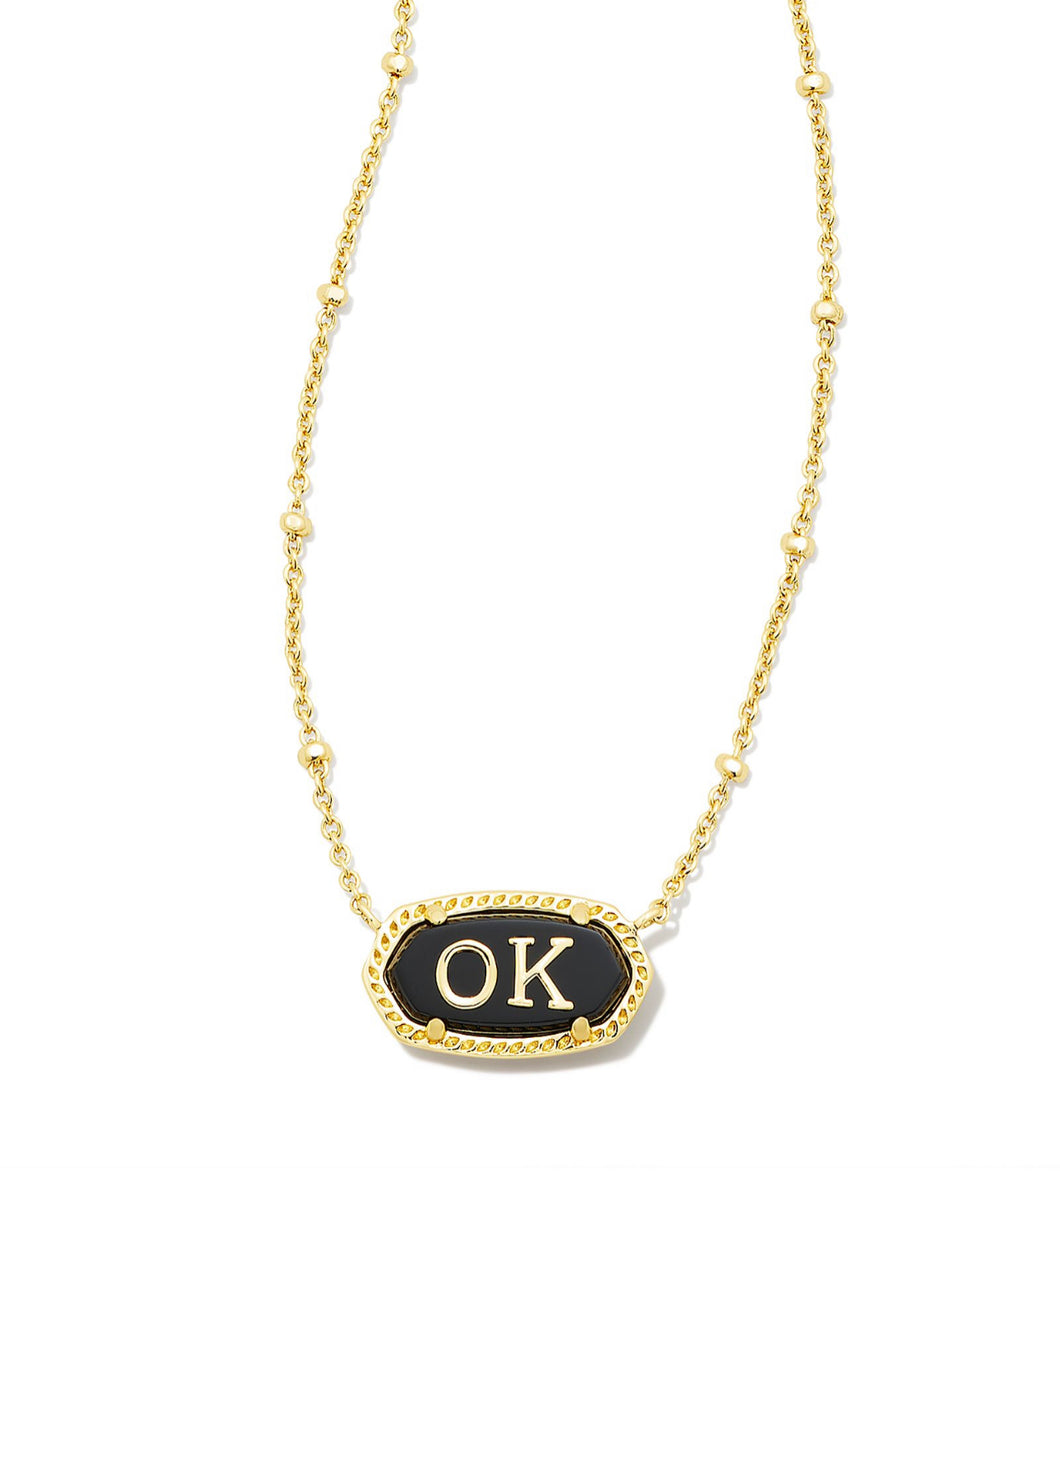 Kendra Scott: Oklahoma Gold Necklace in Black Agate